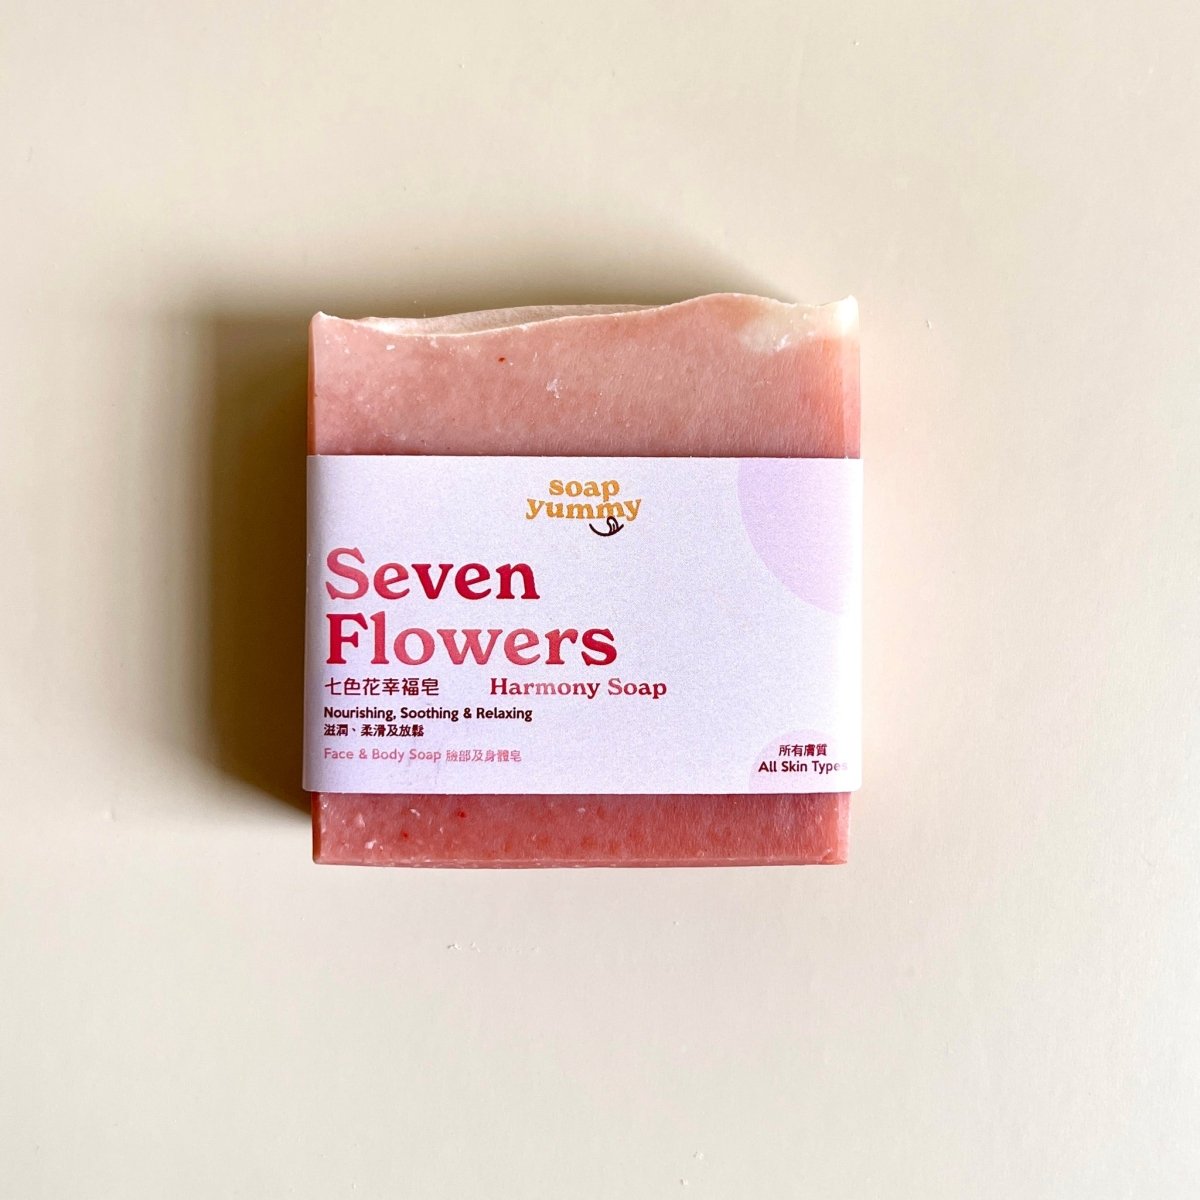 Seven Flowers Harmony Soap by Soap Yummy - BetterThanFlowers